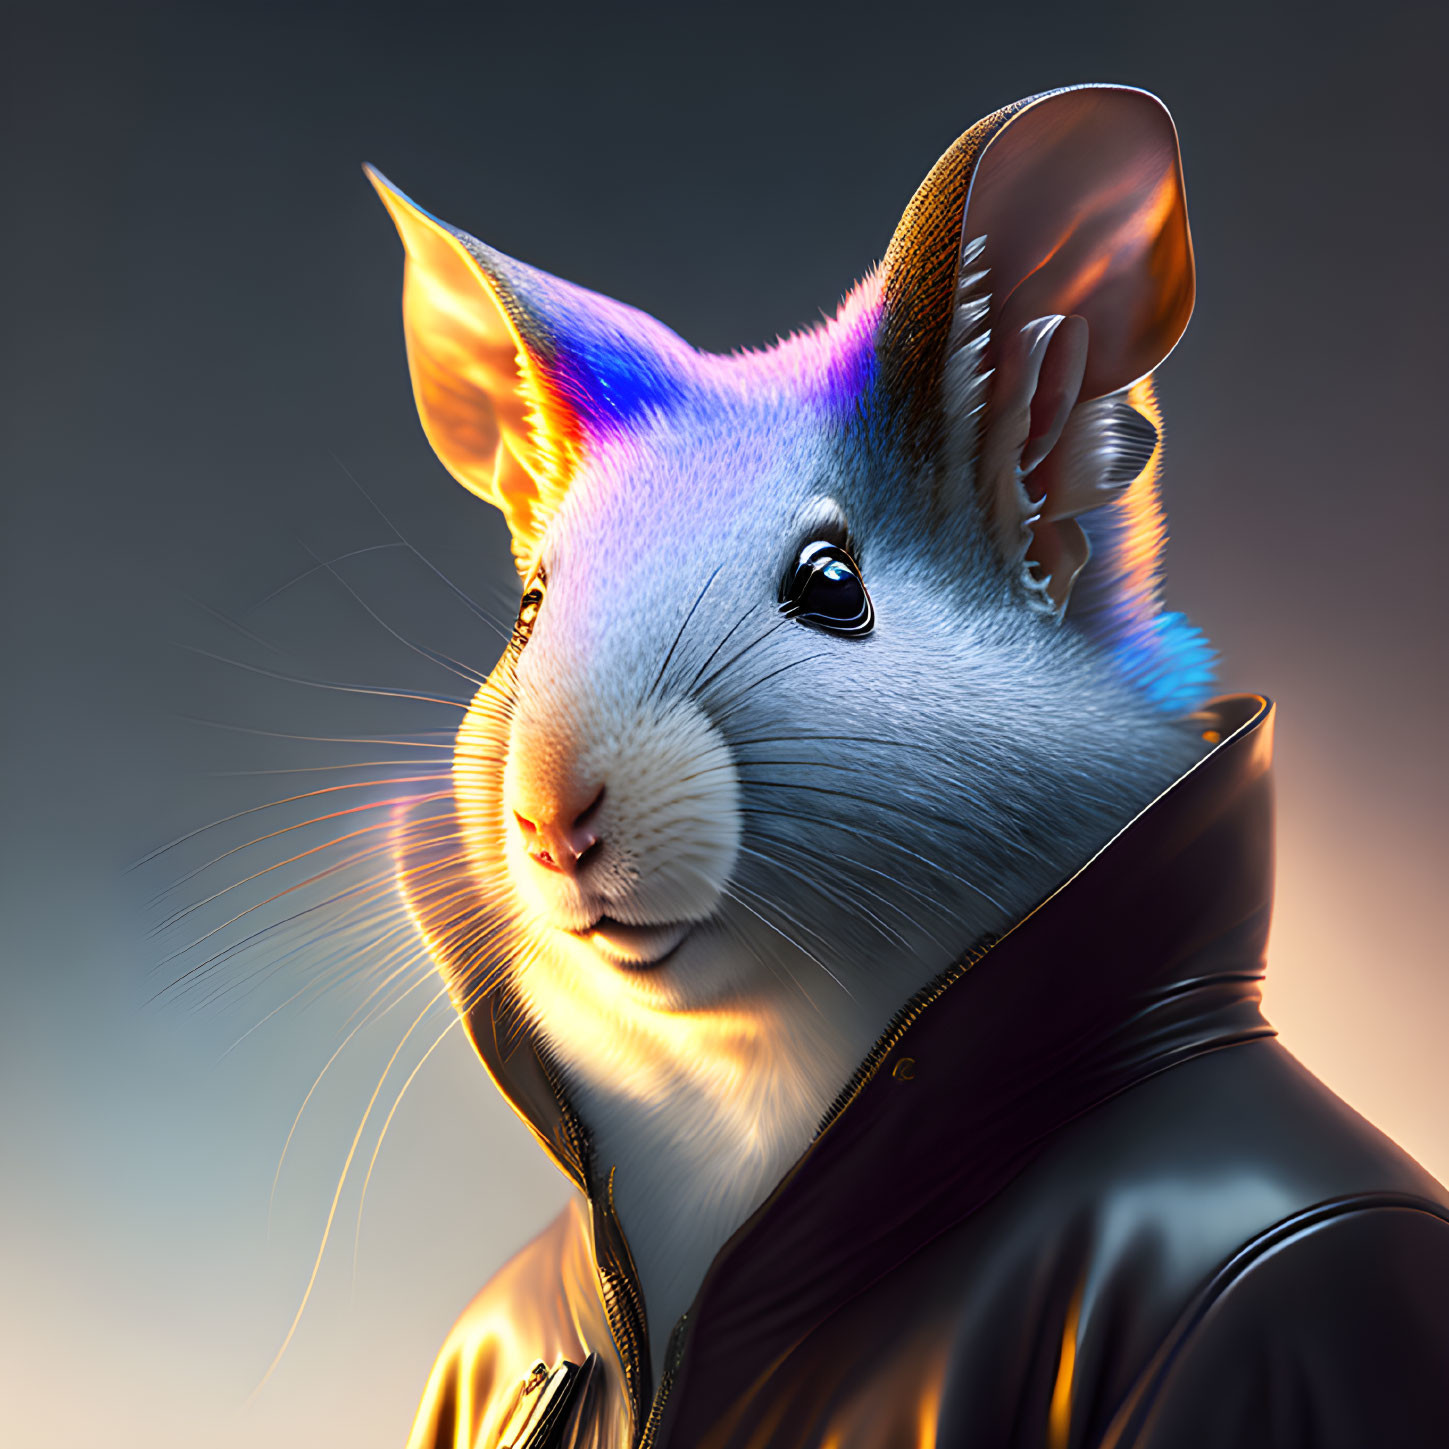 Anthropomorphic rat digital art with realistic face and vibrant blue-purple lighting, in black leather jacket